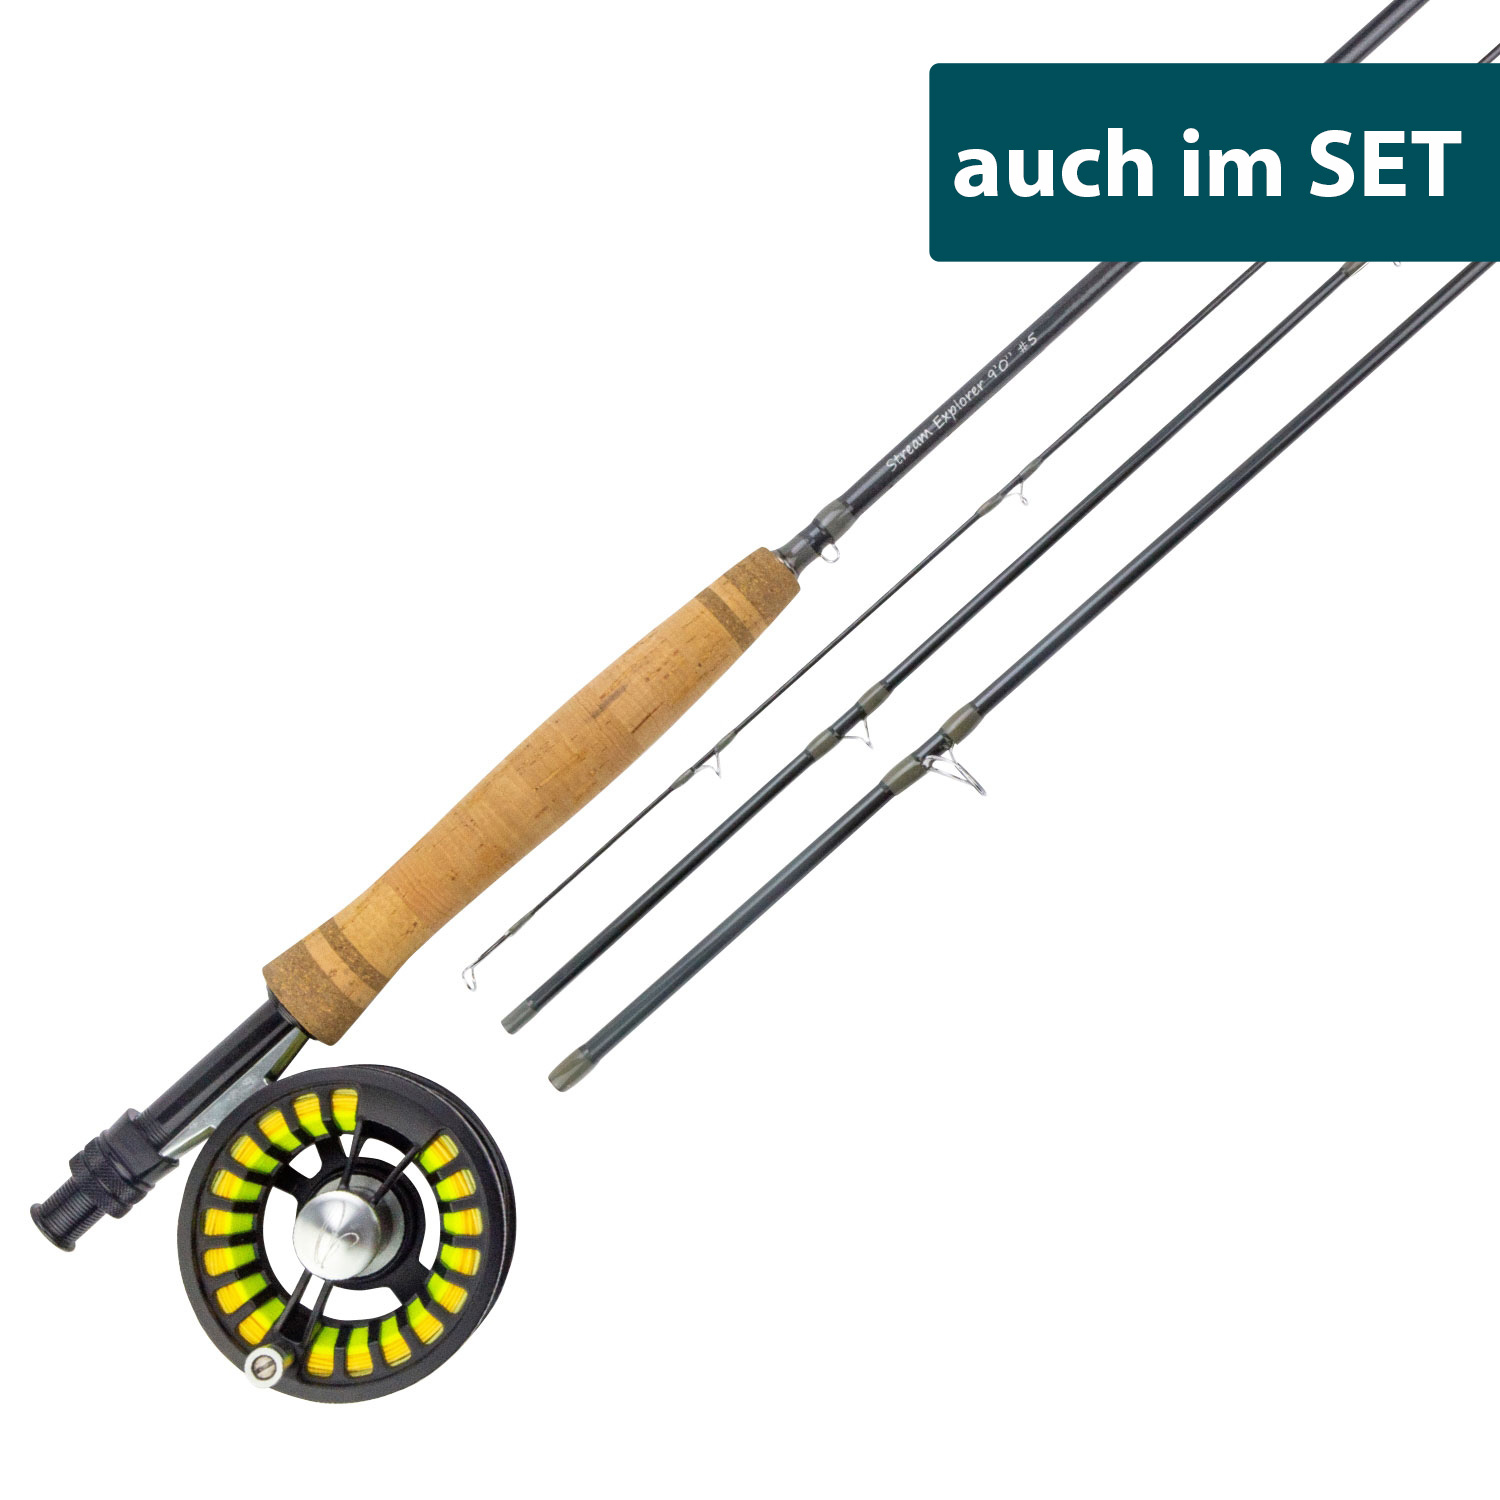 RIO Saltwater Tapered Leaders 10ft - Xplorer Fly Fishing